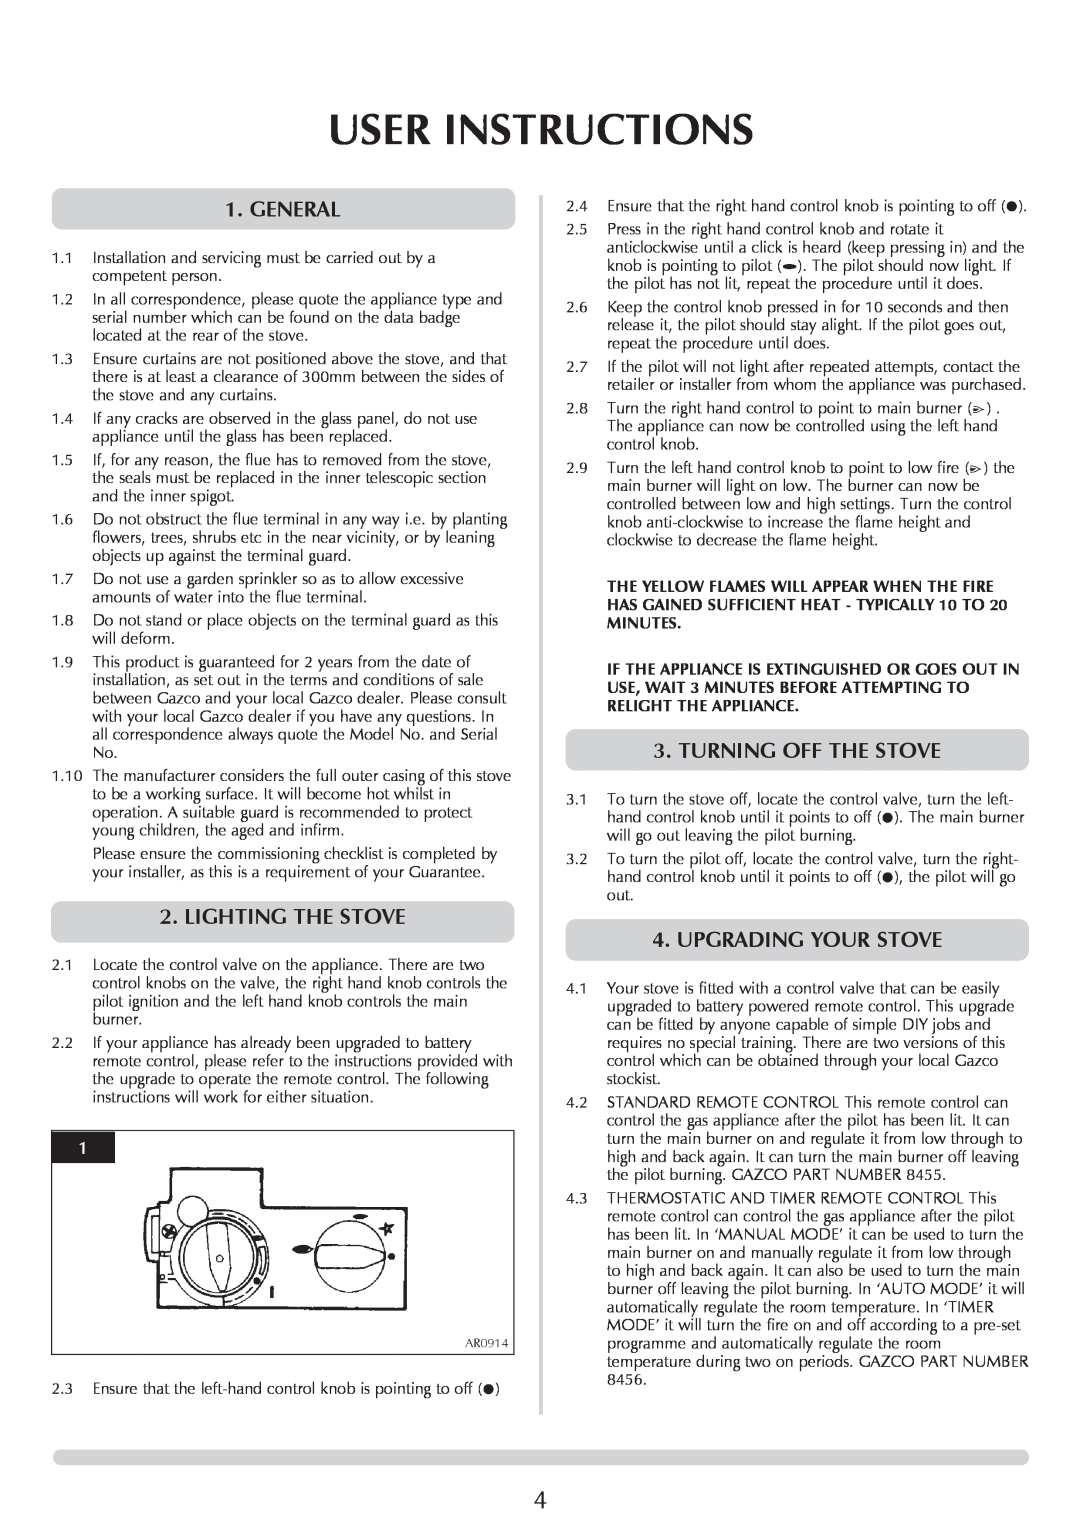 Stovax Ceramica Manhattan Wood Stove manual User Instructions, General, Lighting The Stove, Turning Off The Stove 